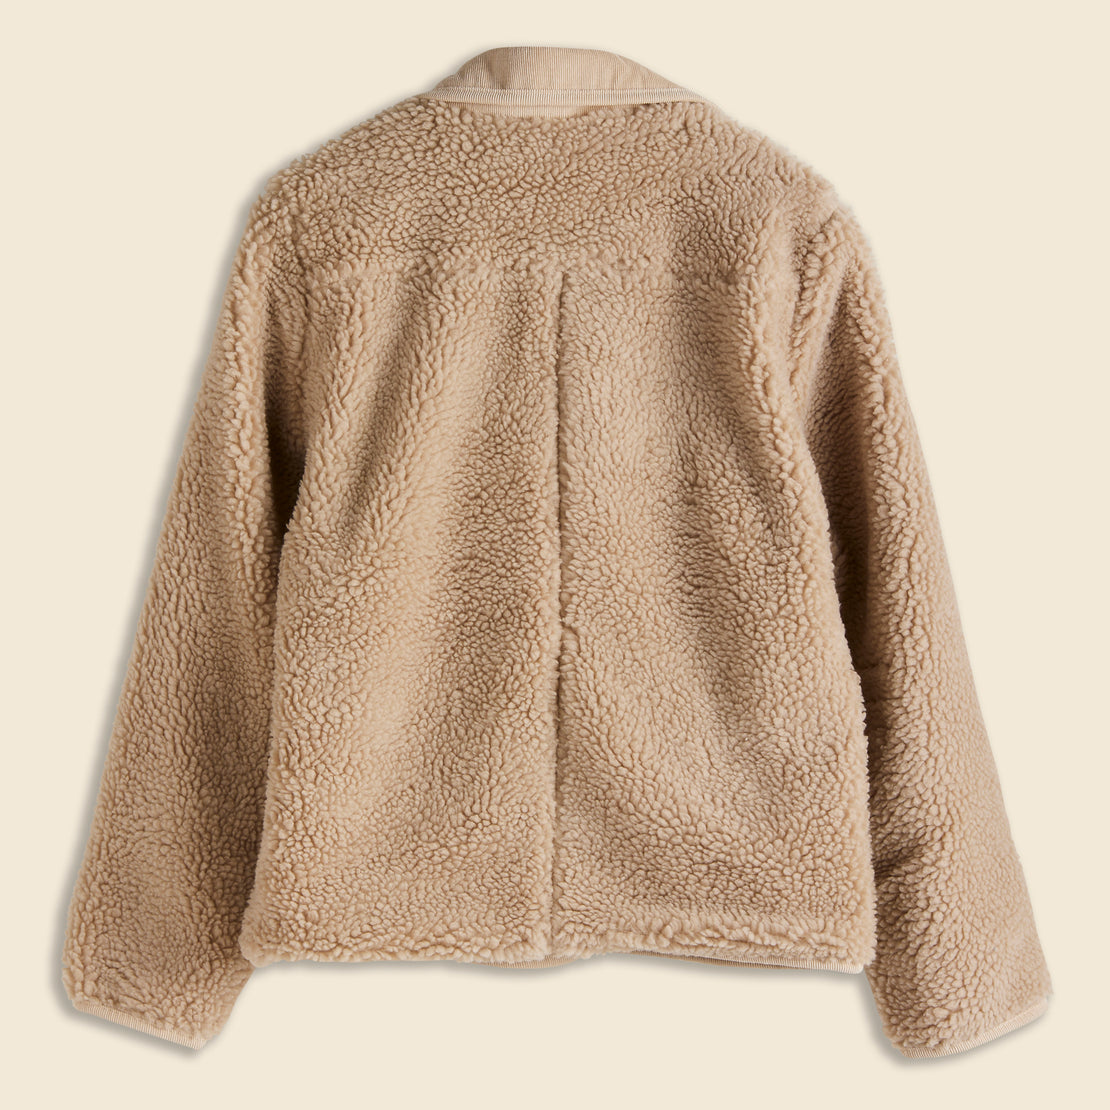 Sherpa Fleece Jacket - Natural - Alex Mill - STAG Provisions - W - Outerwear - Coat/Jacket